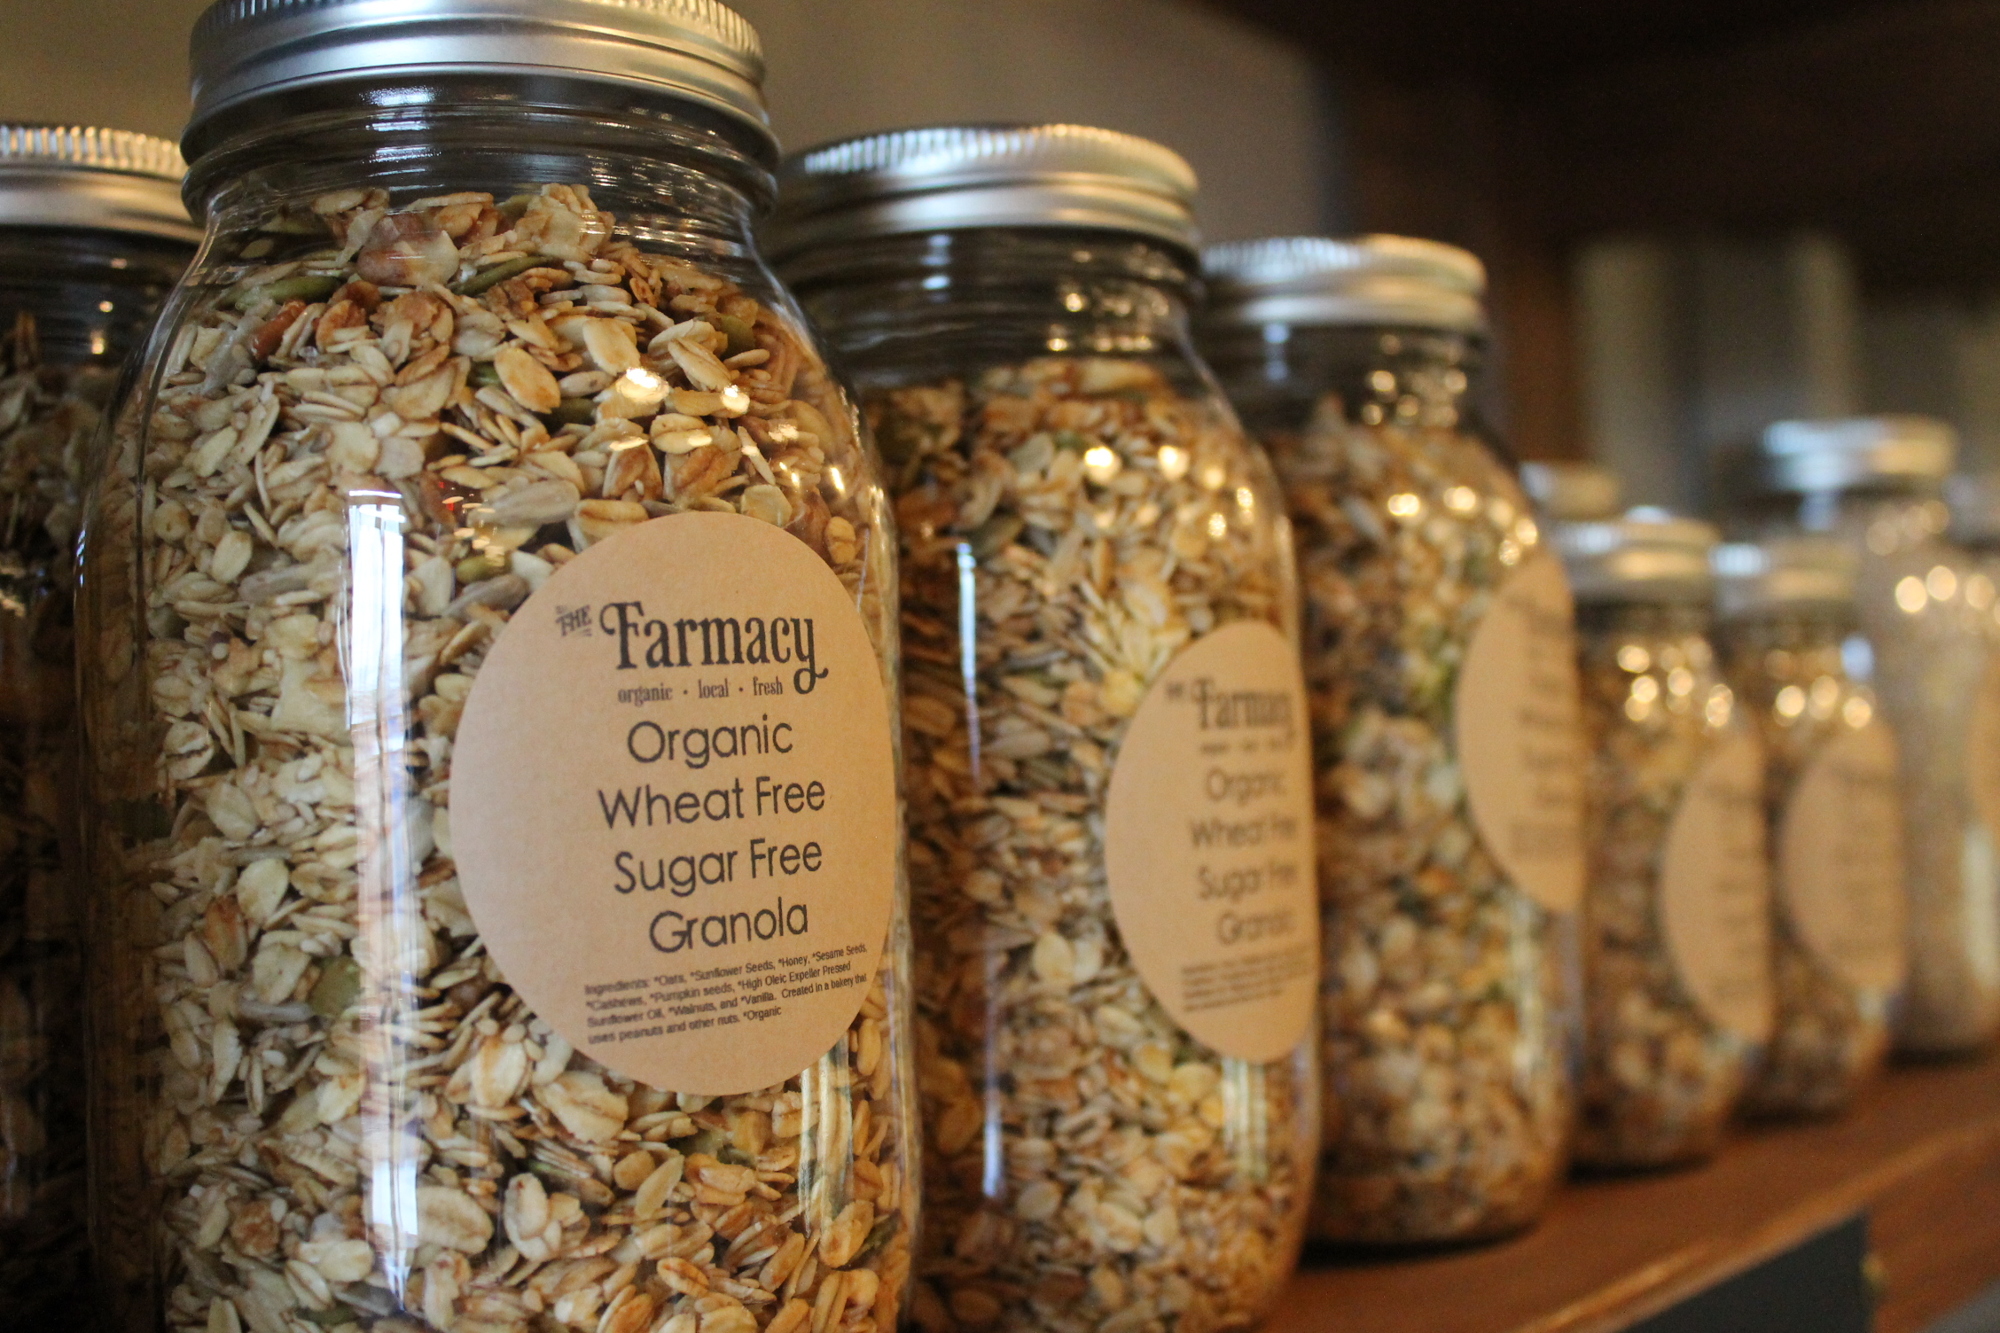 Customers can get a discount if they return the glass jar after purchasing granola and other grains.